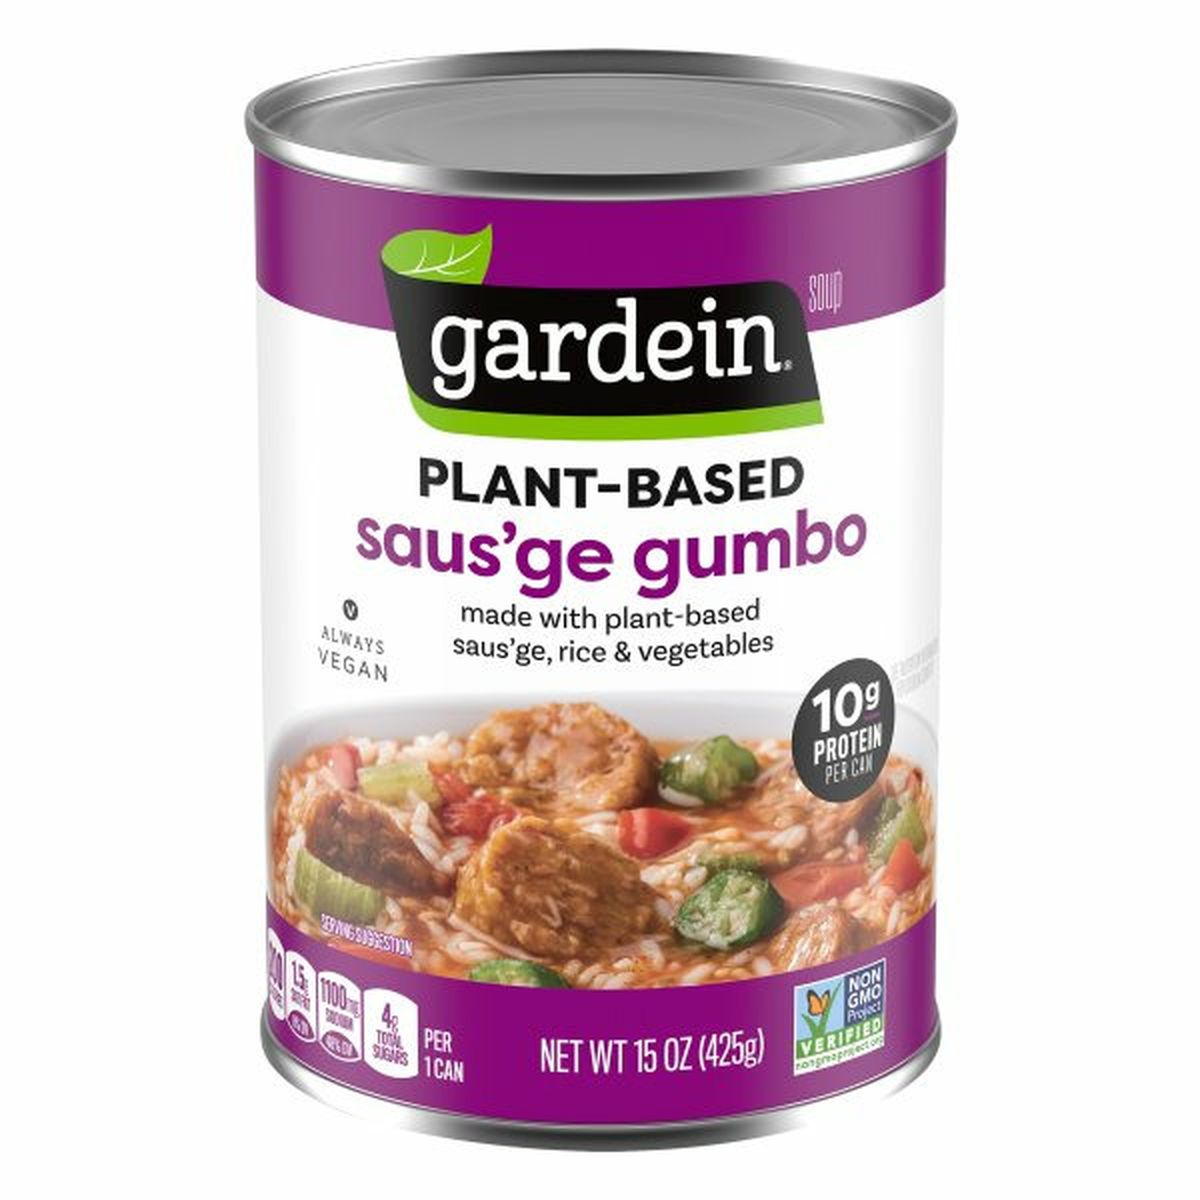 Calories in gardein Soup, Saus'ge Gumbo, Plant-Based